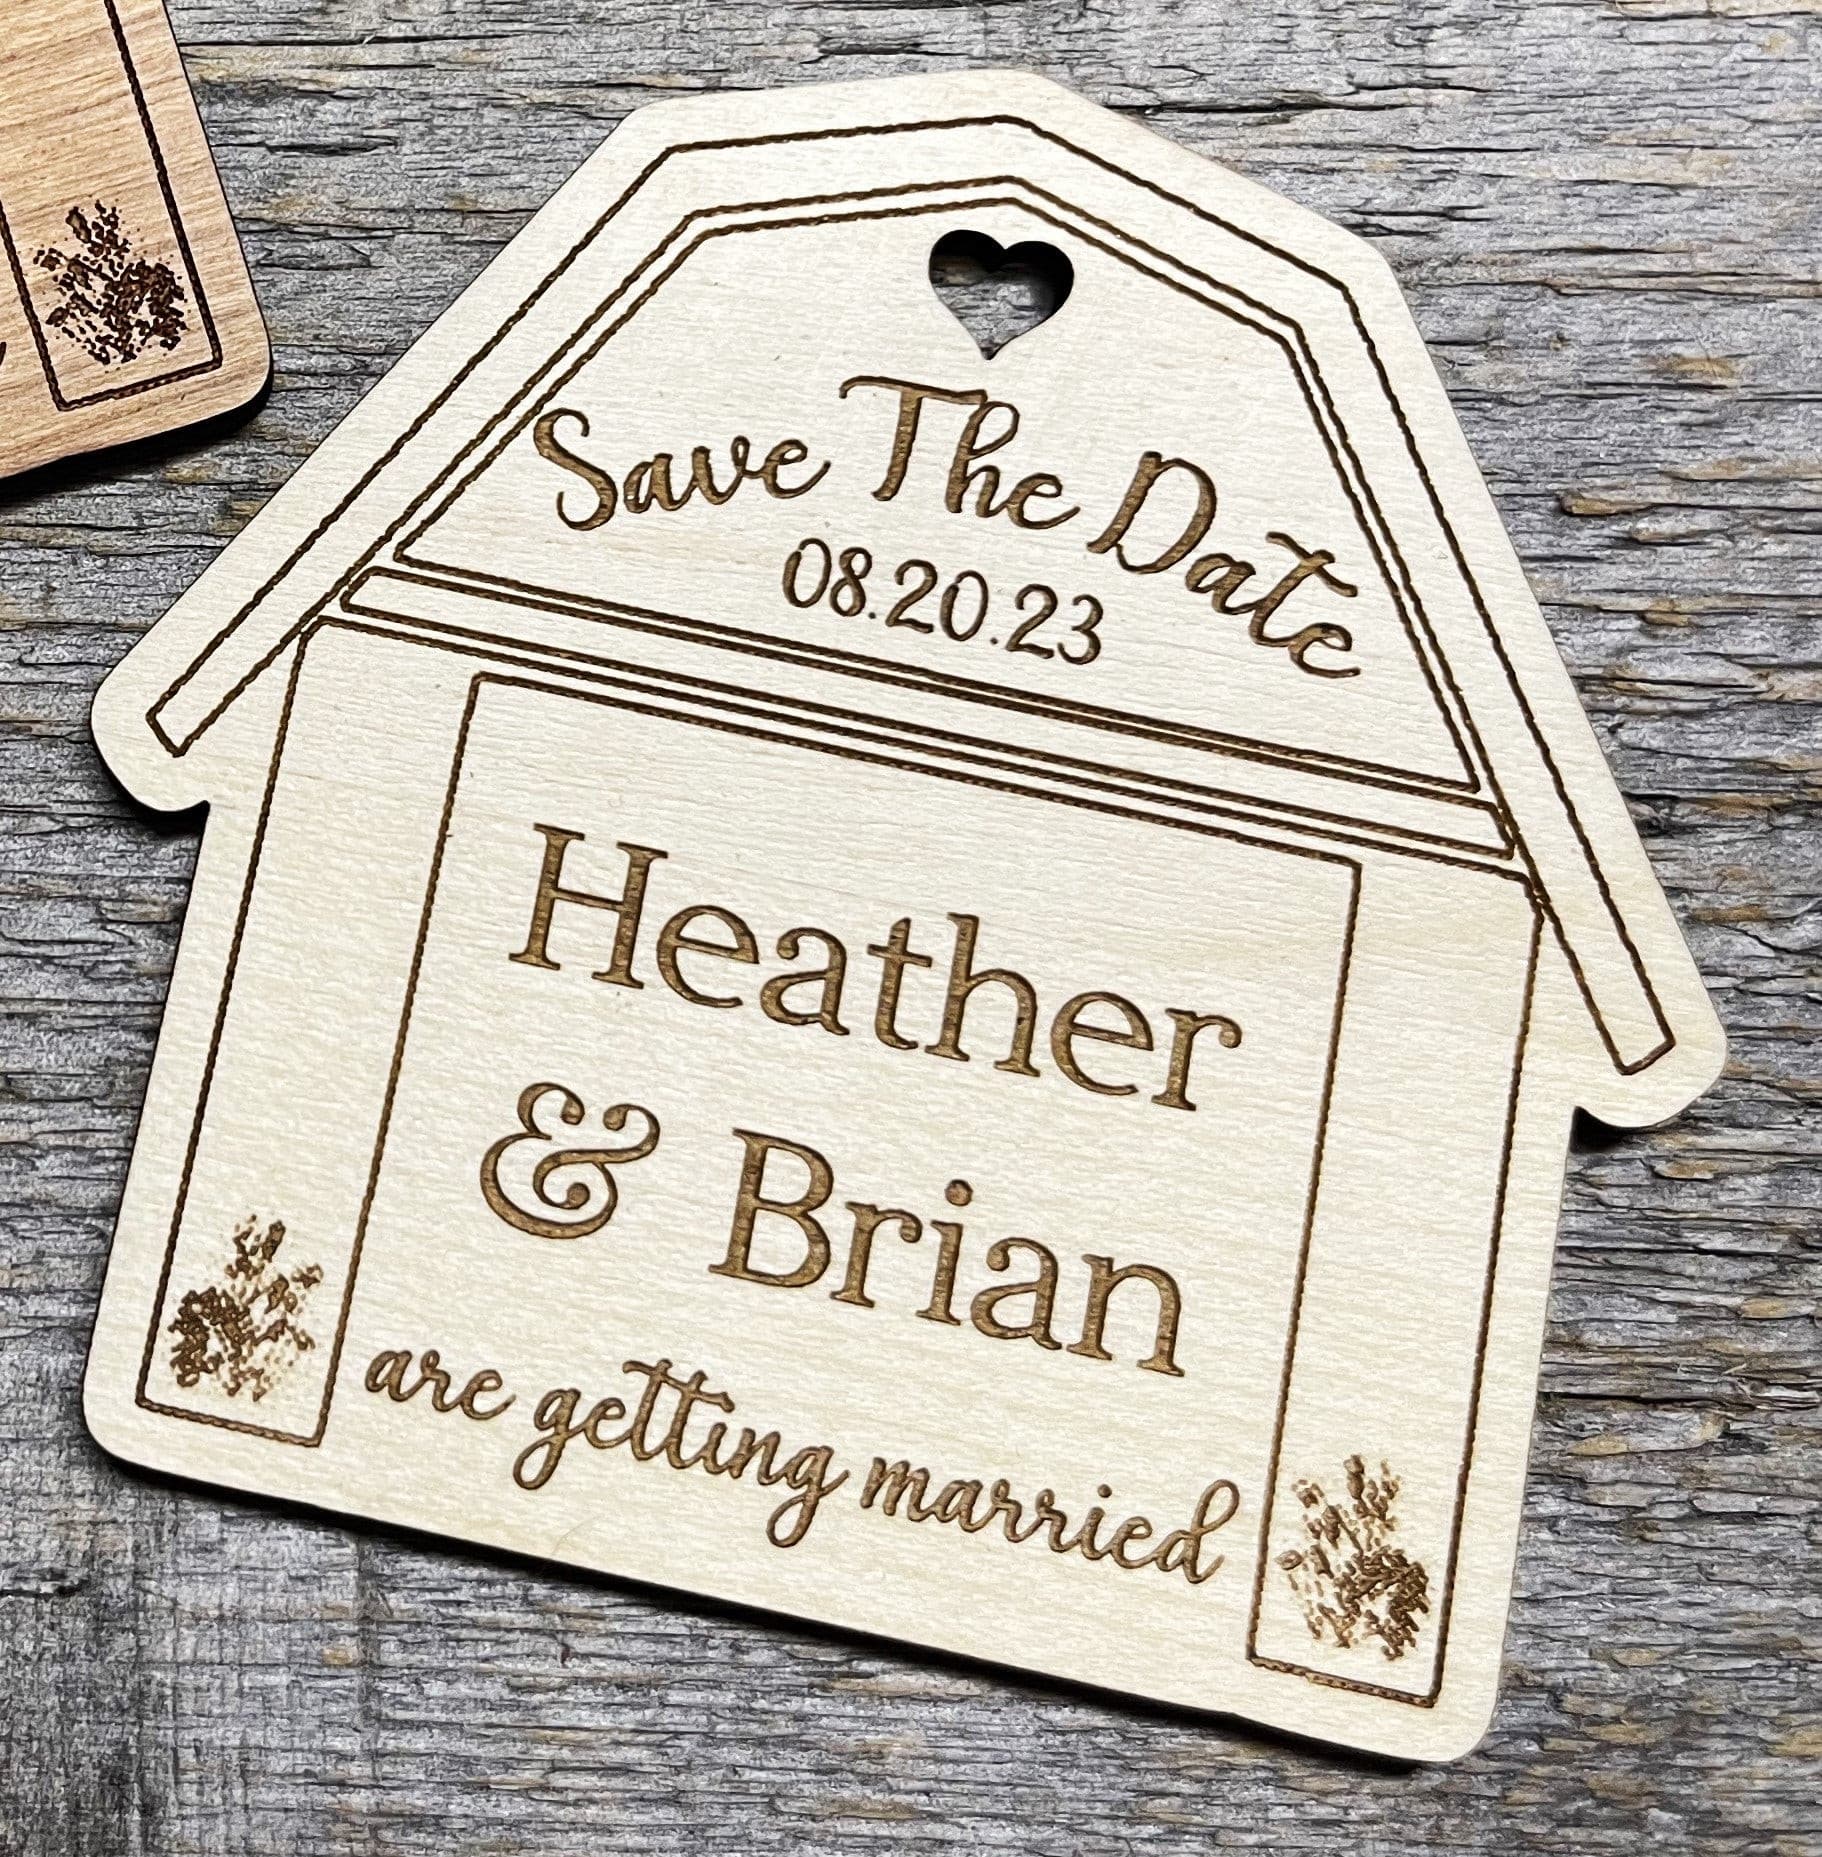 Save the Date Fridge Magnets.